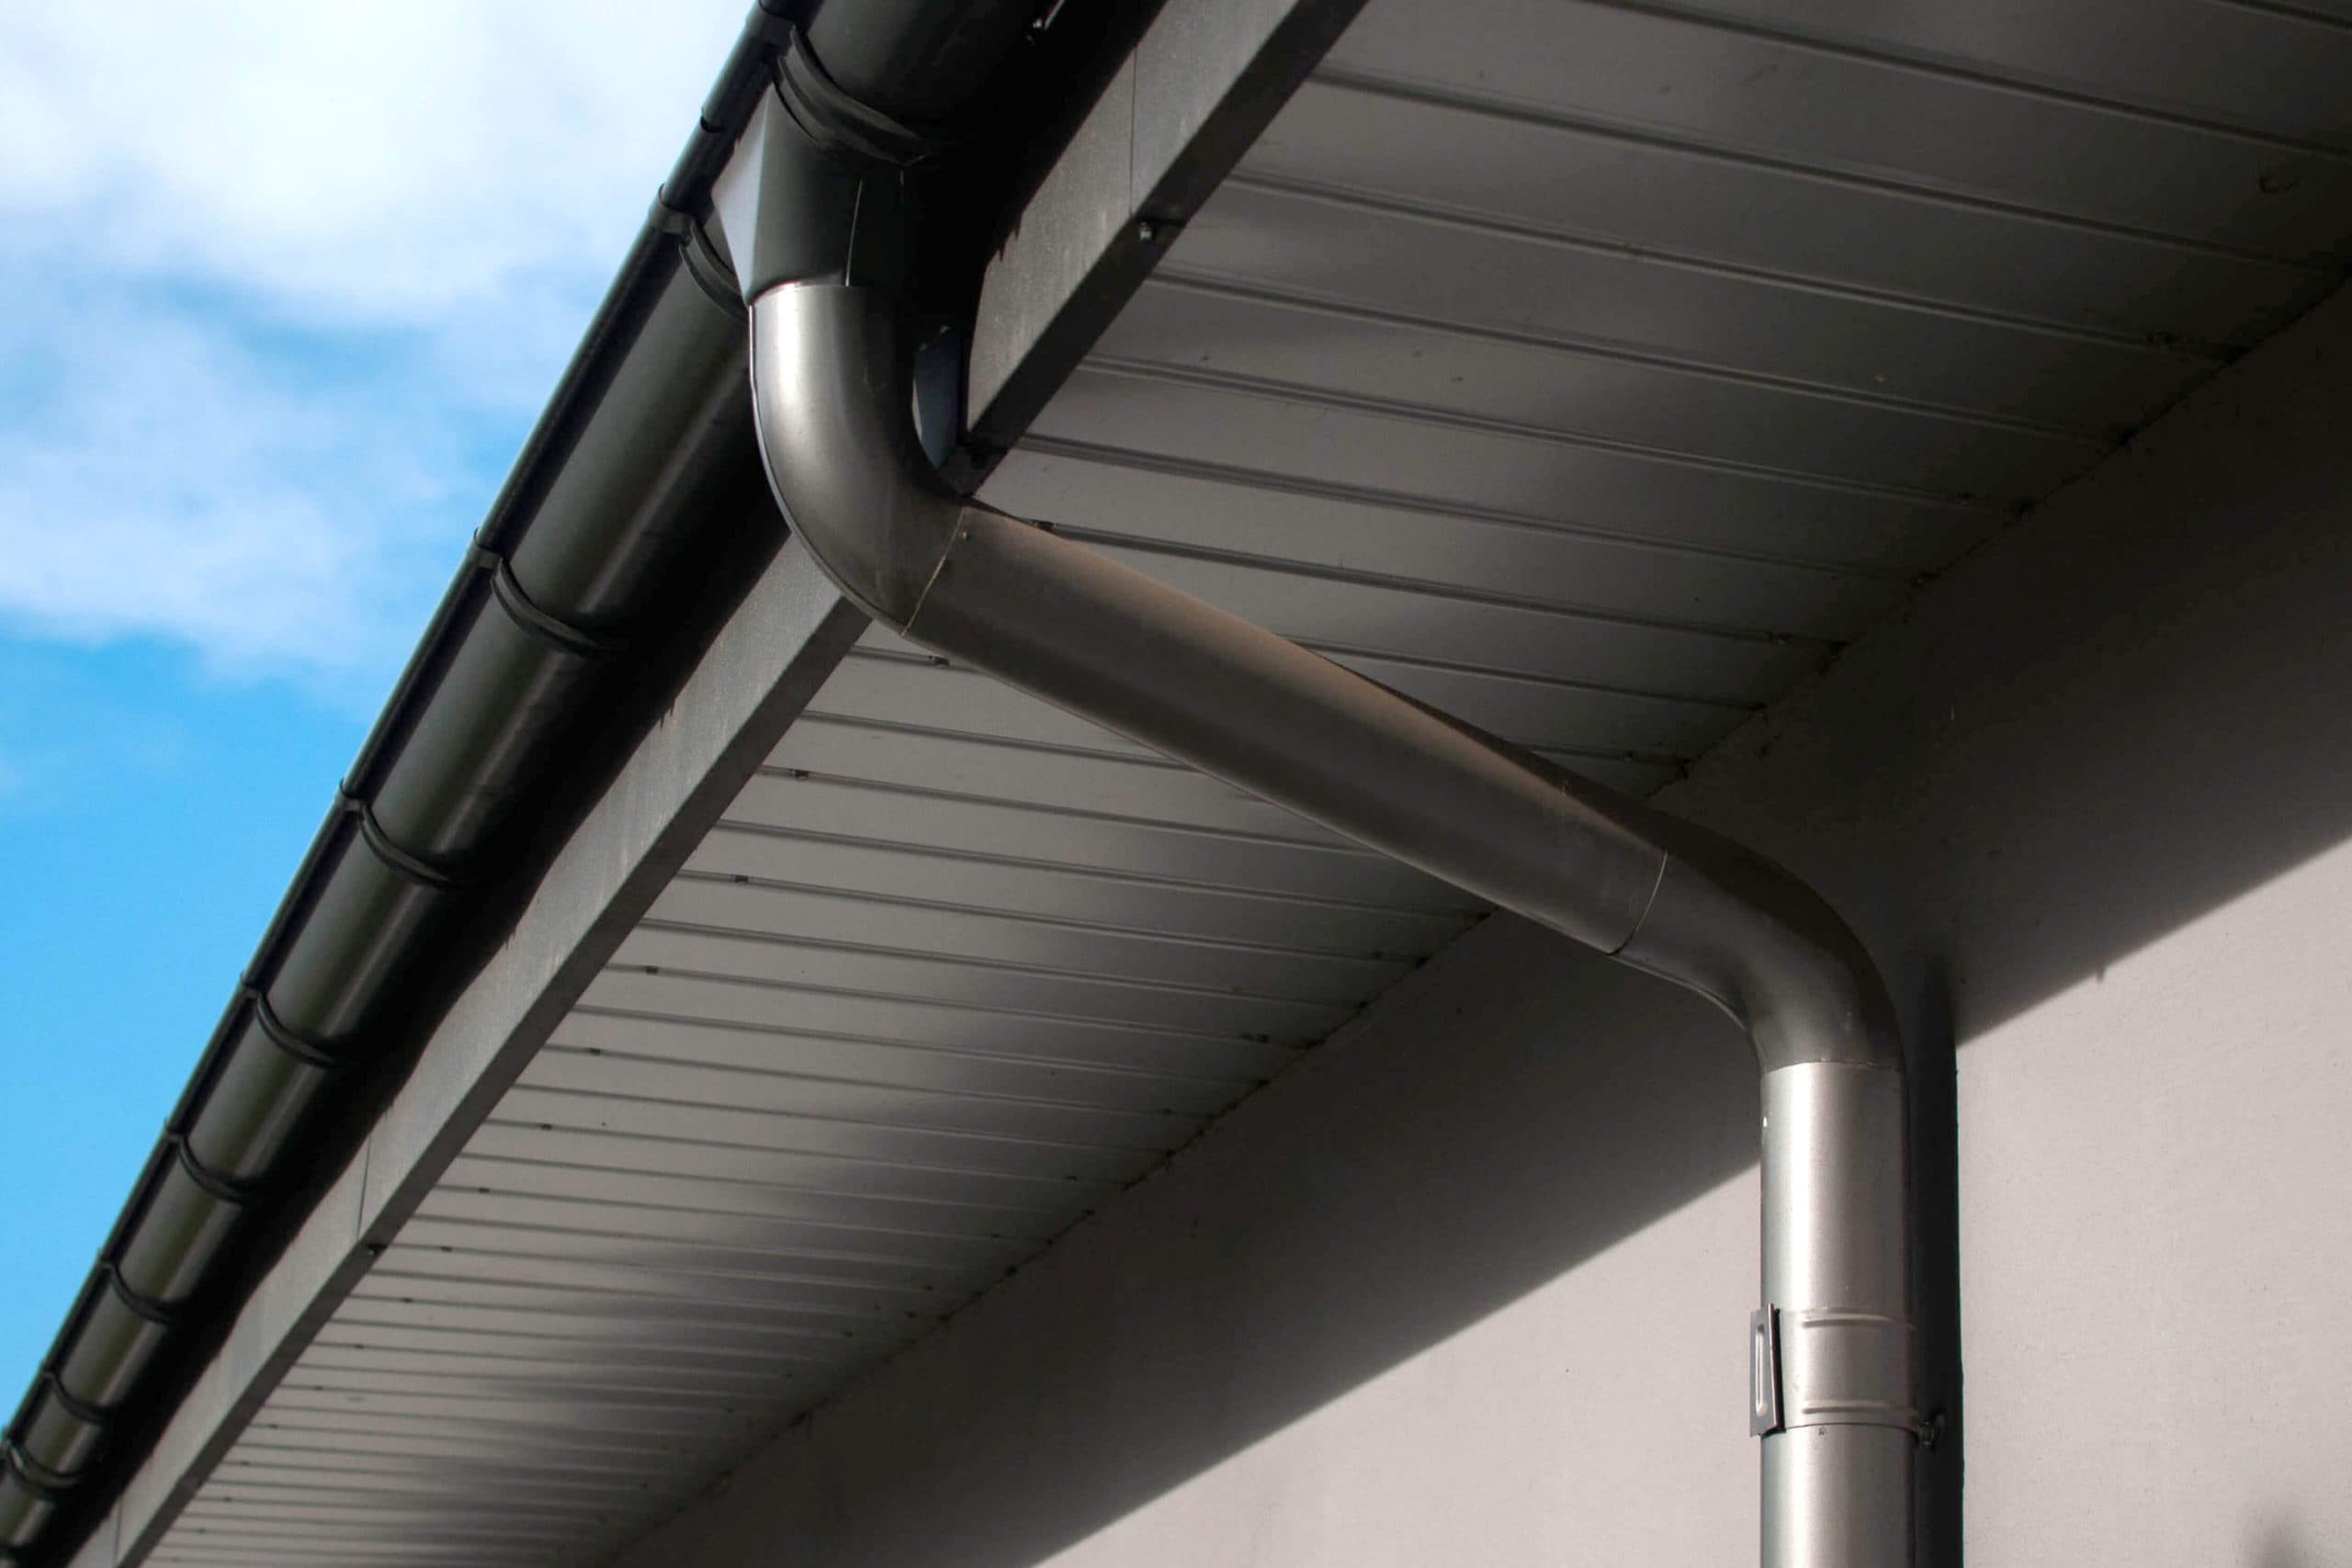 Corrosion-resistant galvanized gutters installed on a commercial building in Fayetteville